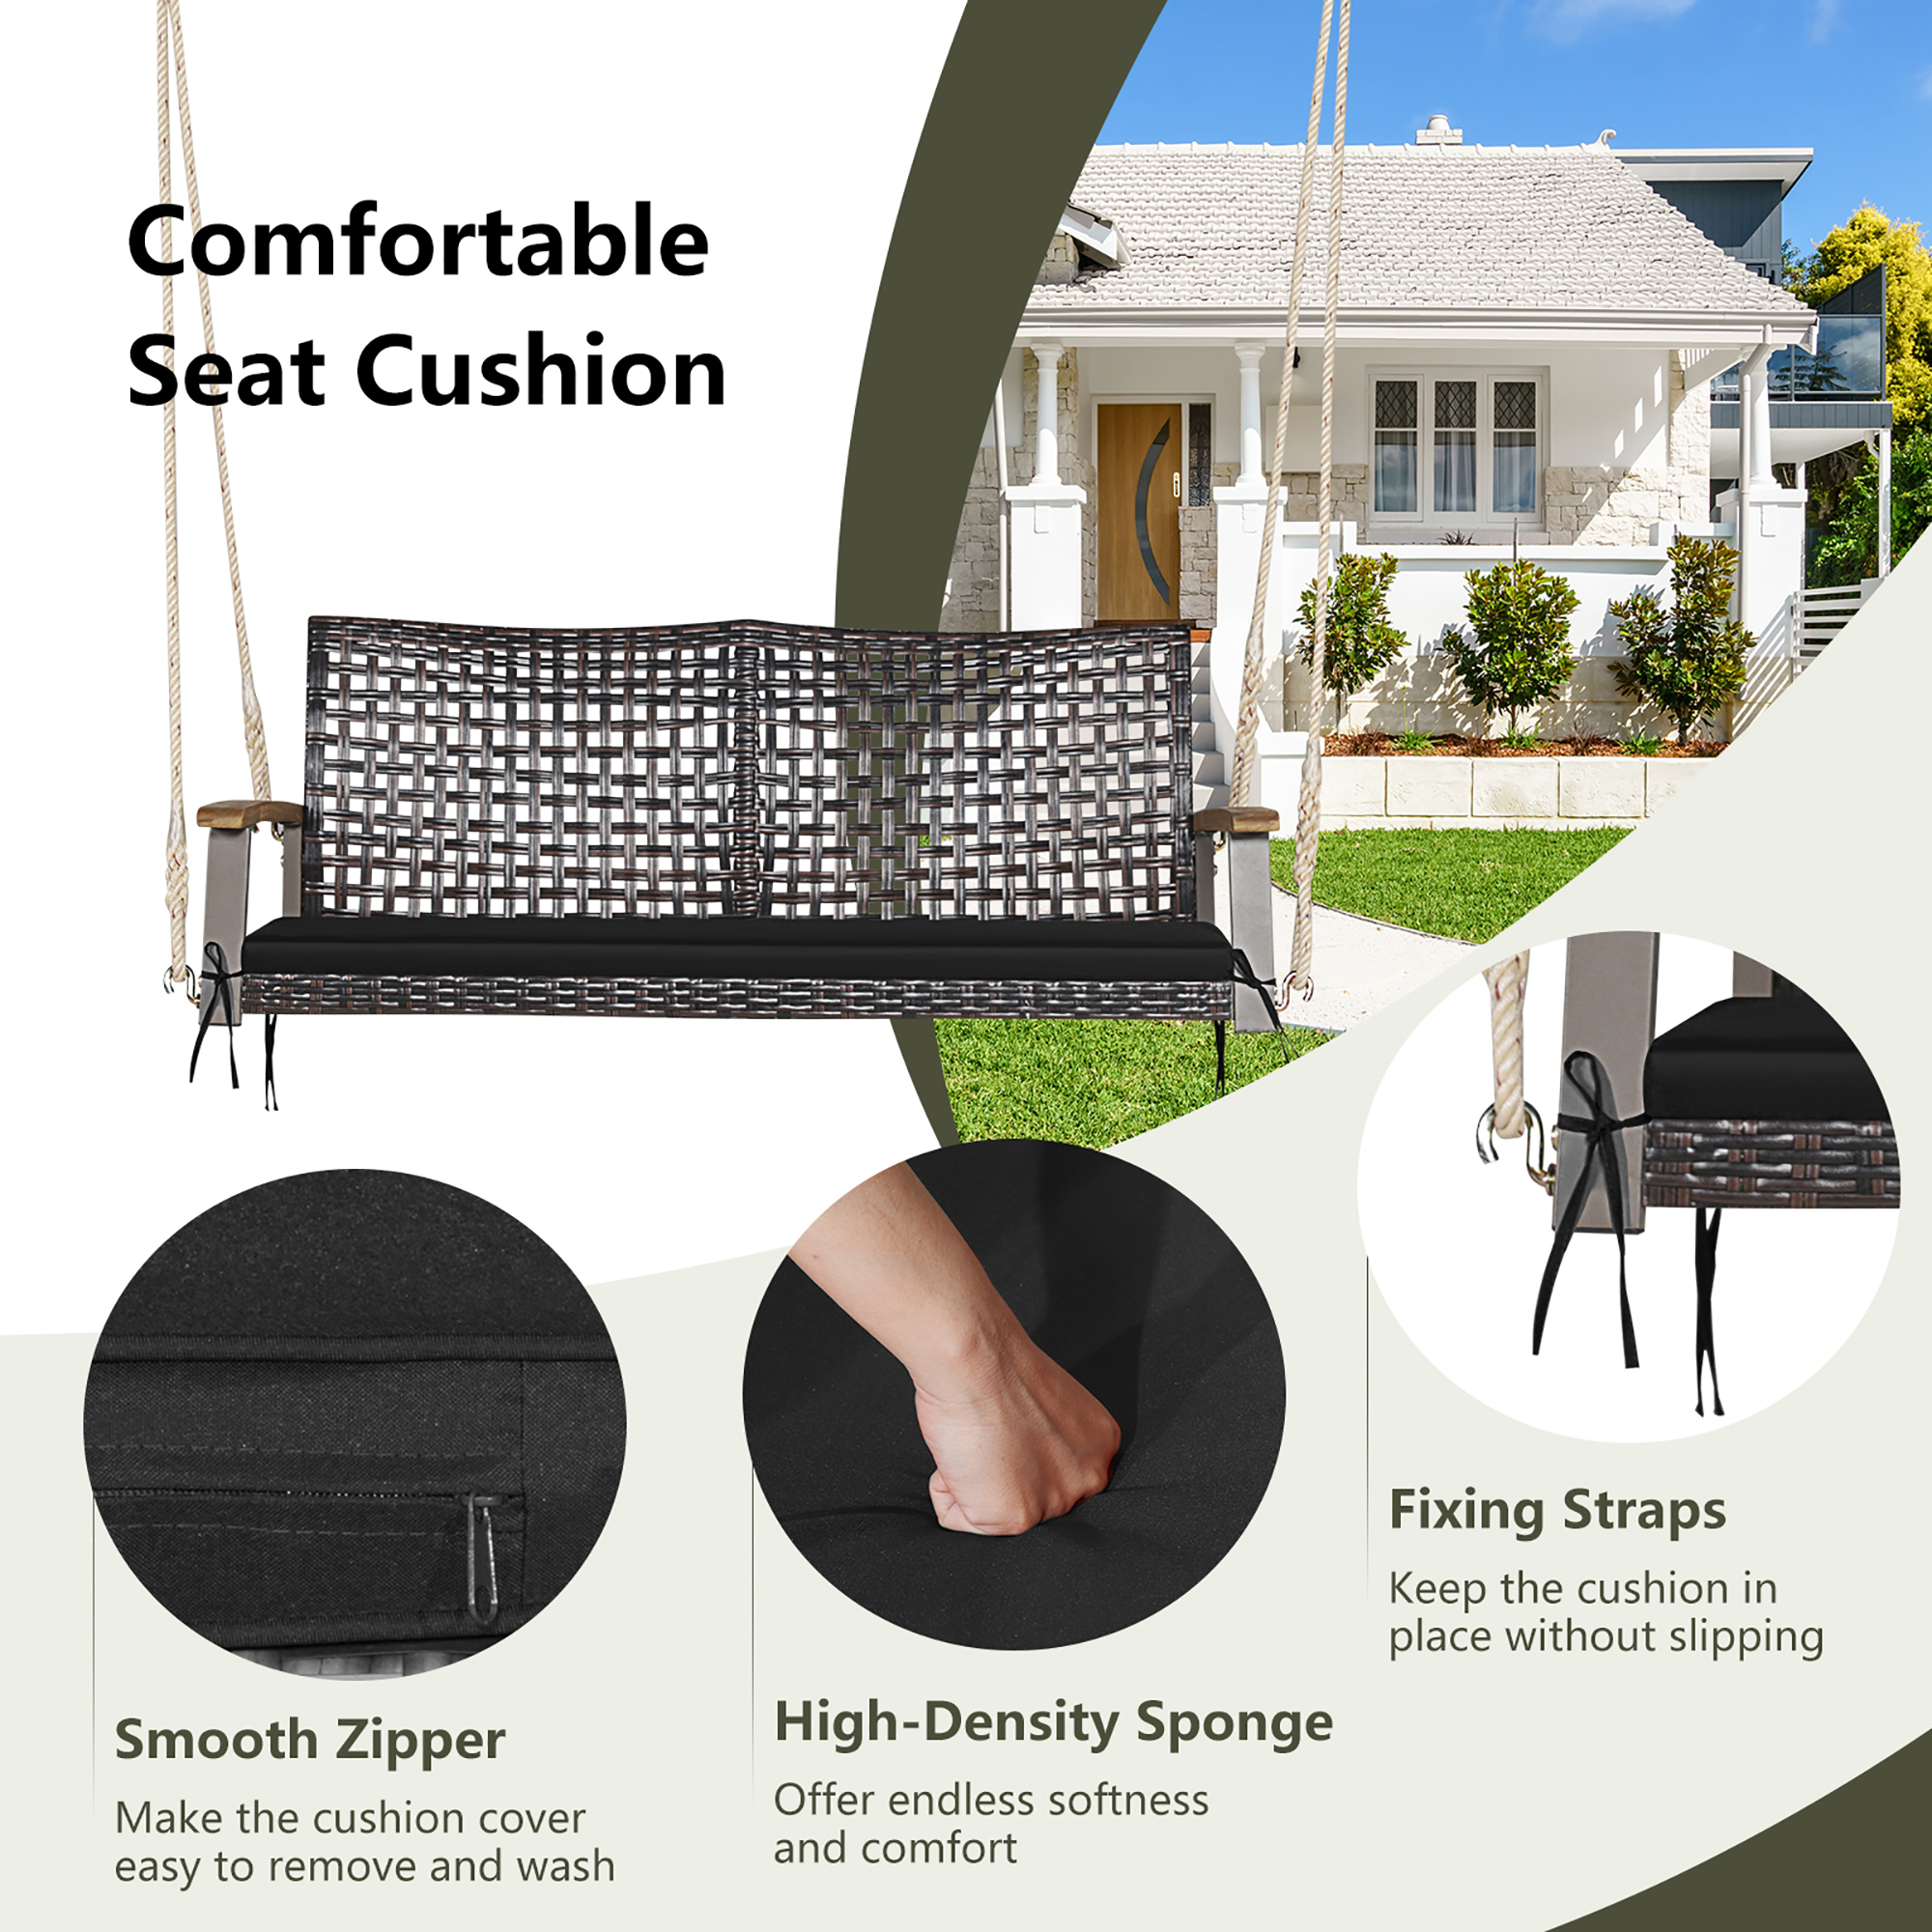 Gymax 2-Seat Rattan Porch Swing Chair Outdoor Wicker Swing Bench W/ Seat Cushion Black - image 5 of 8